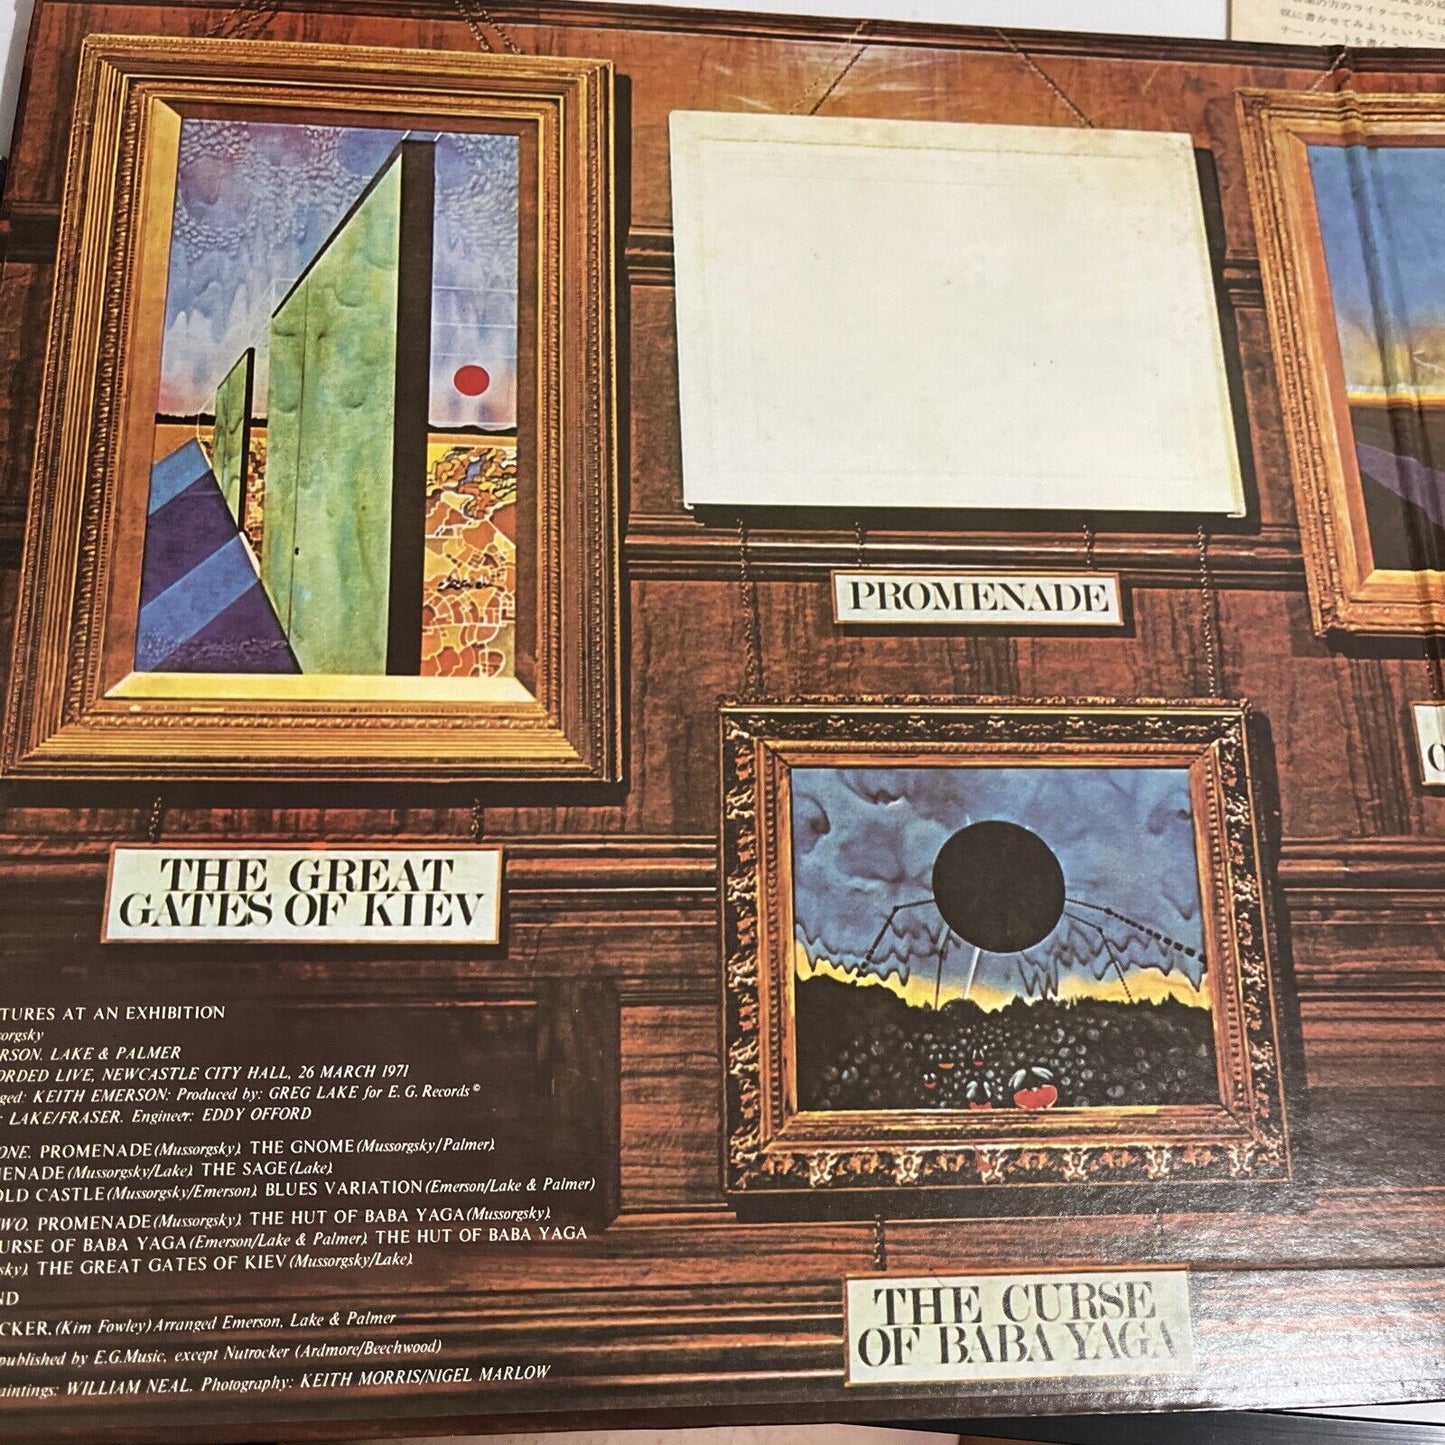 Emerson, Lake & Palmer – Pictures At An Exhibition LP Vinyl Record Gatefold 1972